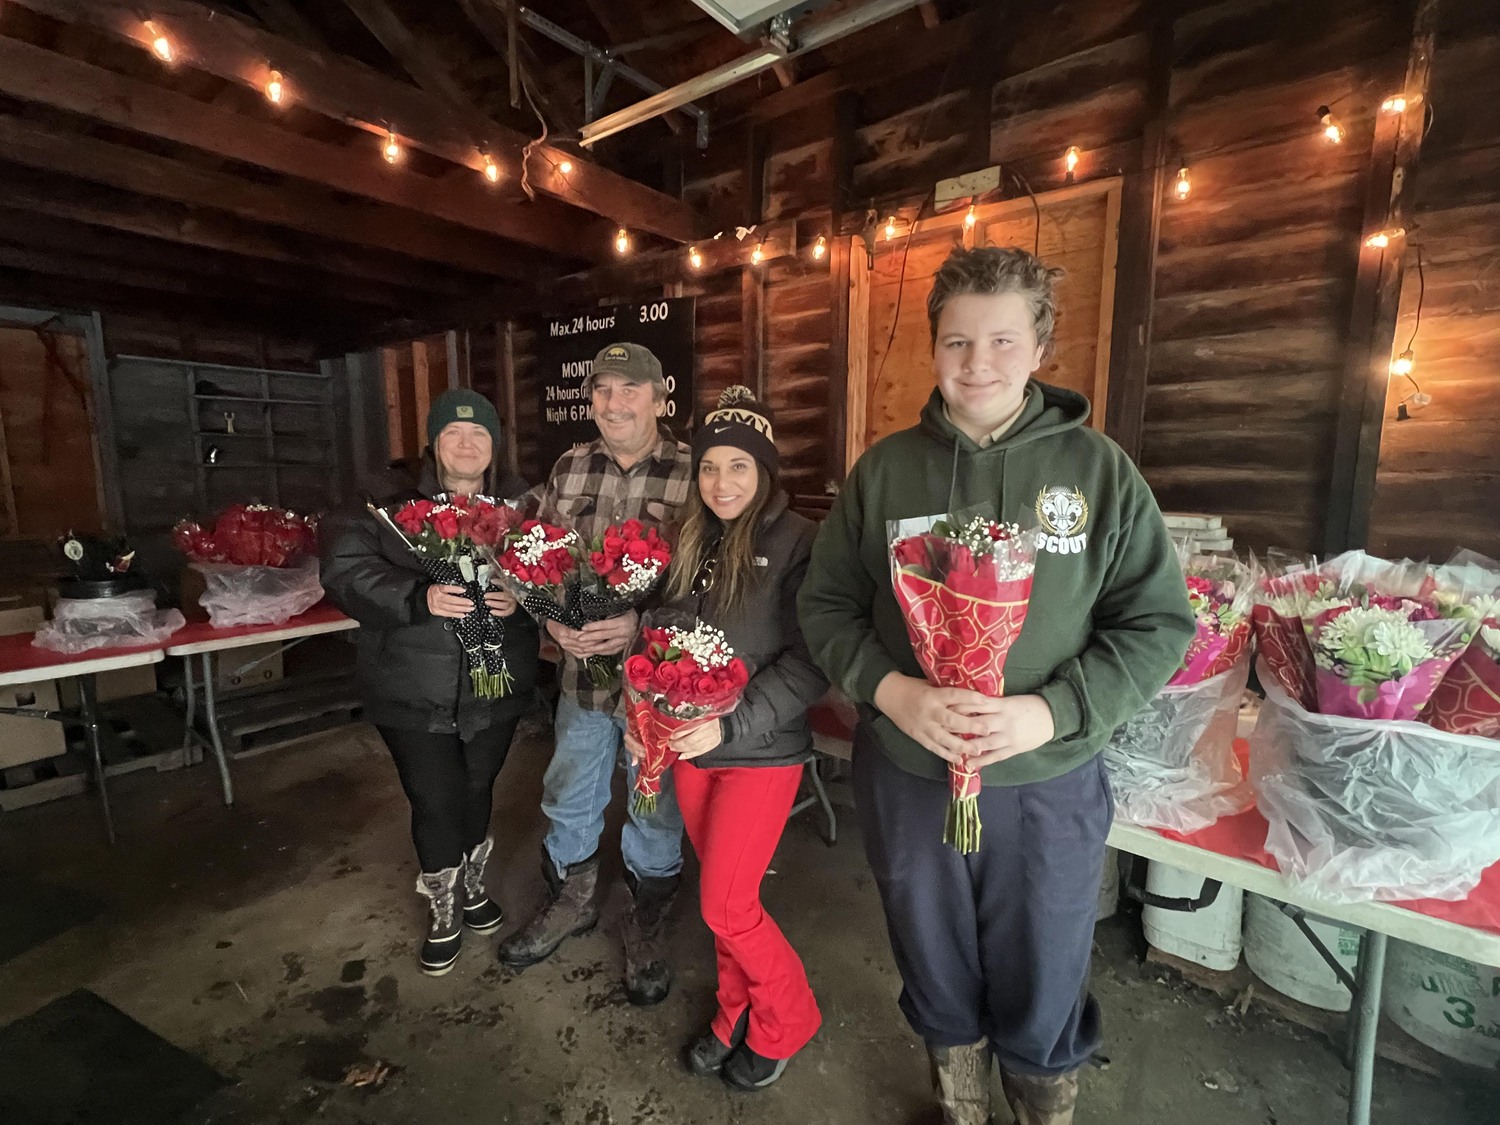 Despite the inclement weather Hampton Bays Boy Scout Troop 483 was busy selling rose bouquets  for Valentine's Day on Tuesday. Pictured are Barbara and Todd Anderson, Heather Haynia and John Anderson with some of their wares.